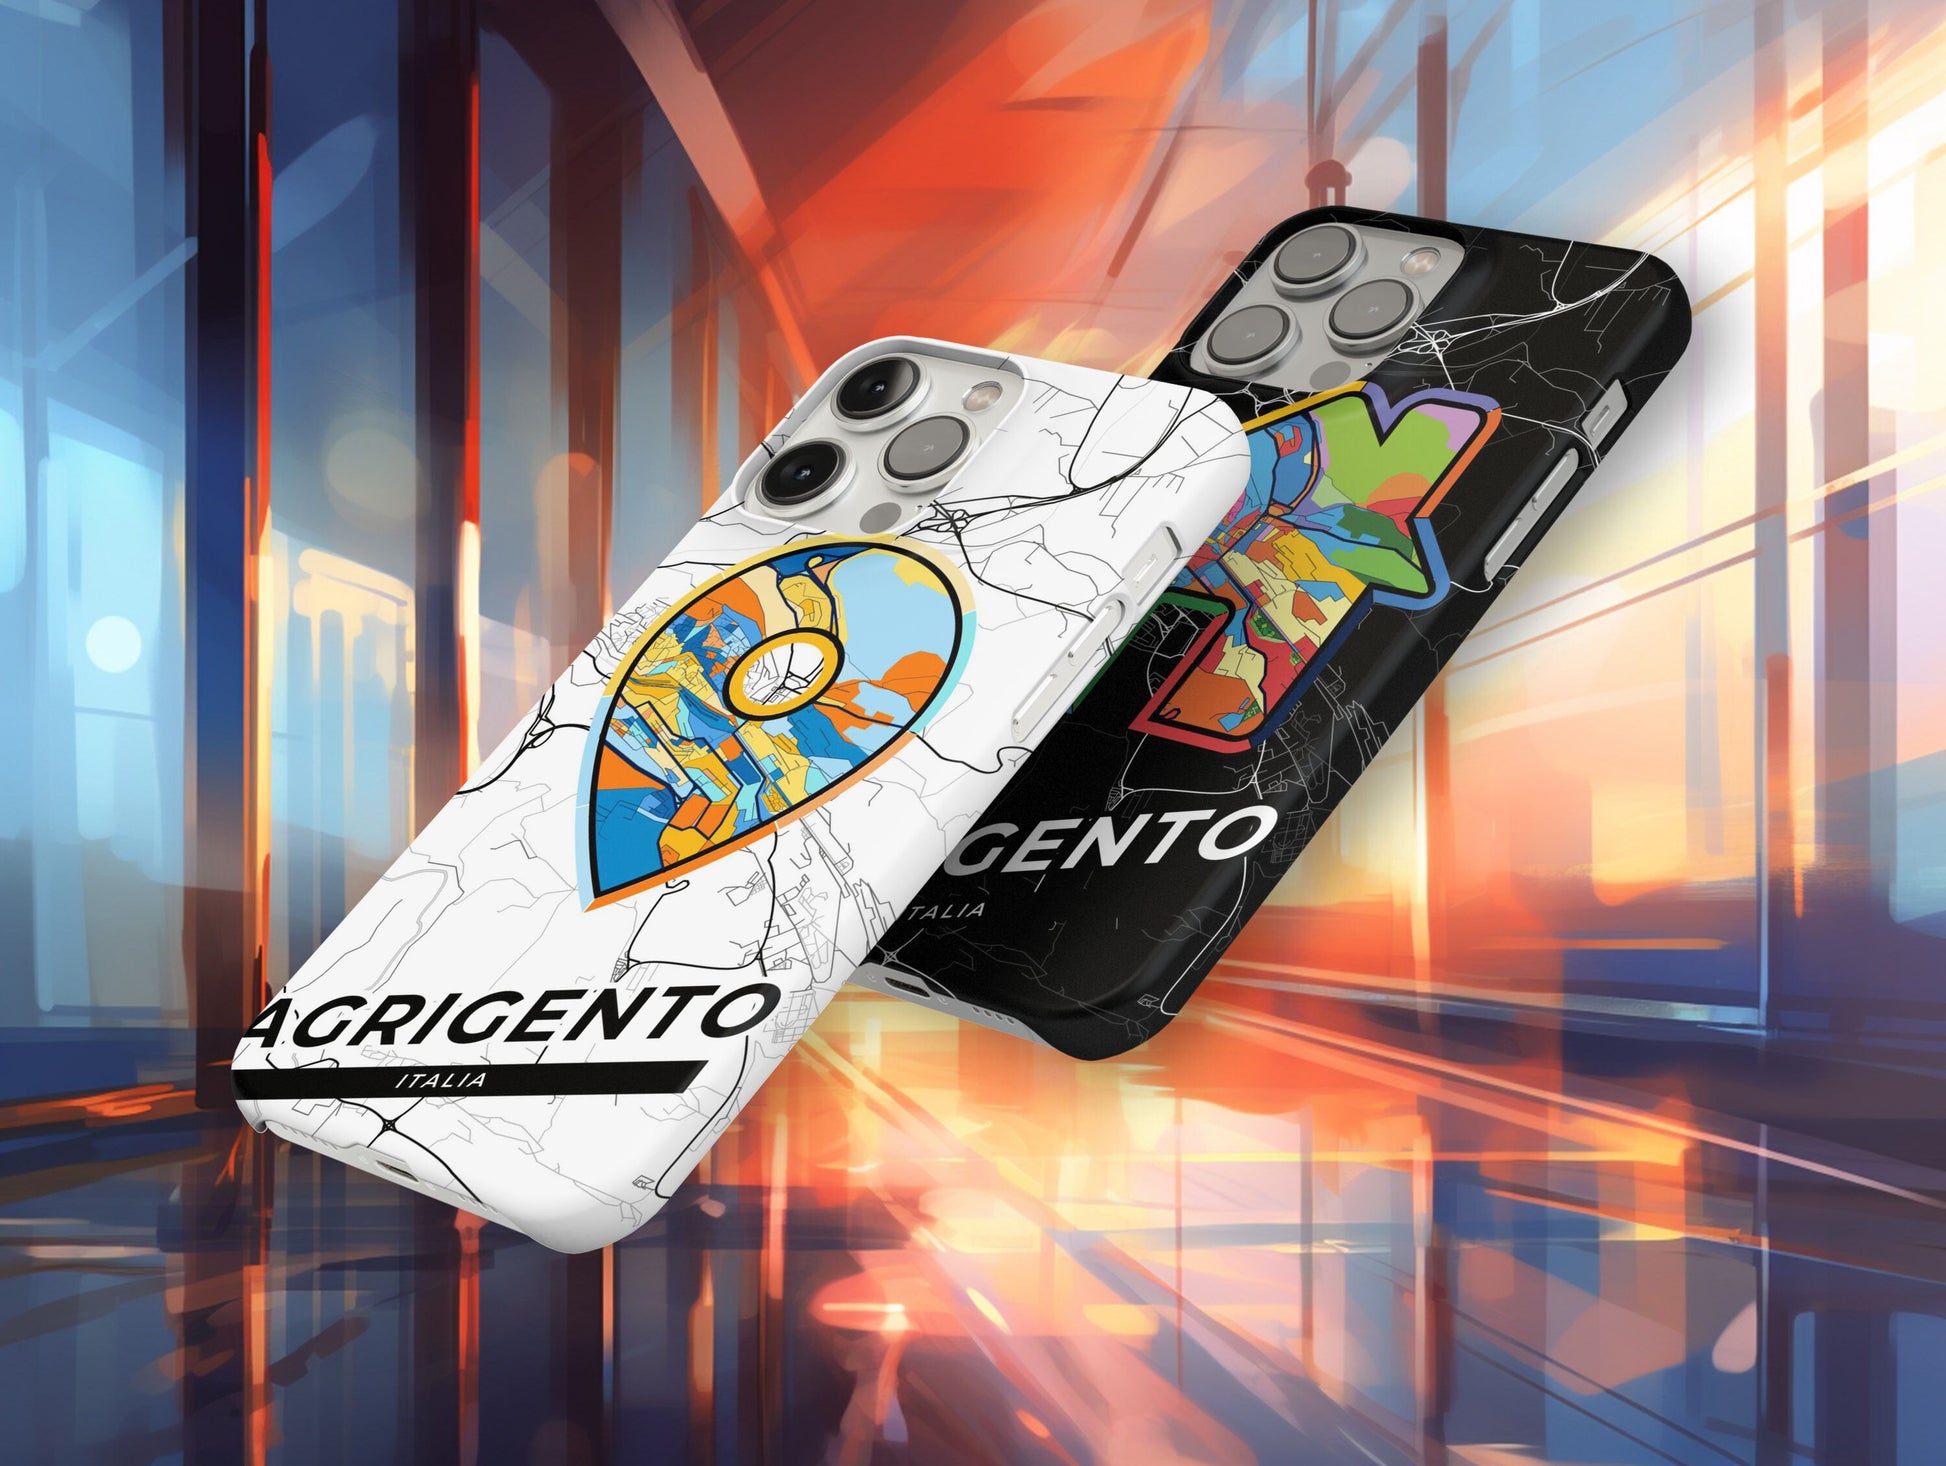 Agrigento Italy slim phone case with colorful icon. Birthday, wedding or housewarming gift. Couple match cases.